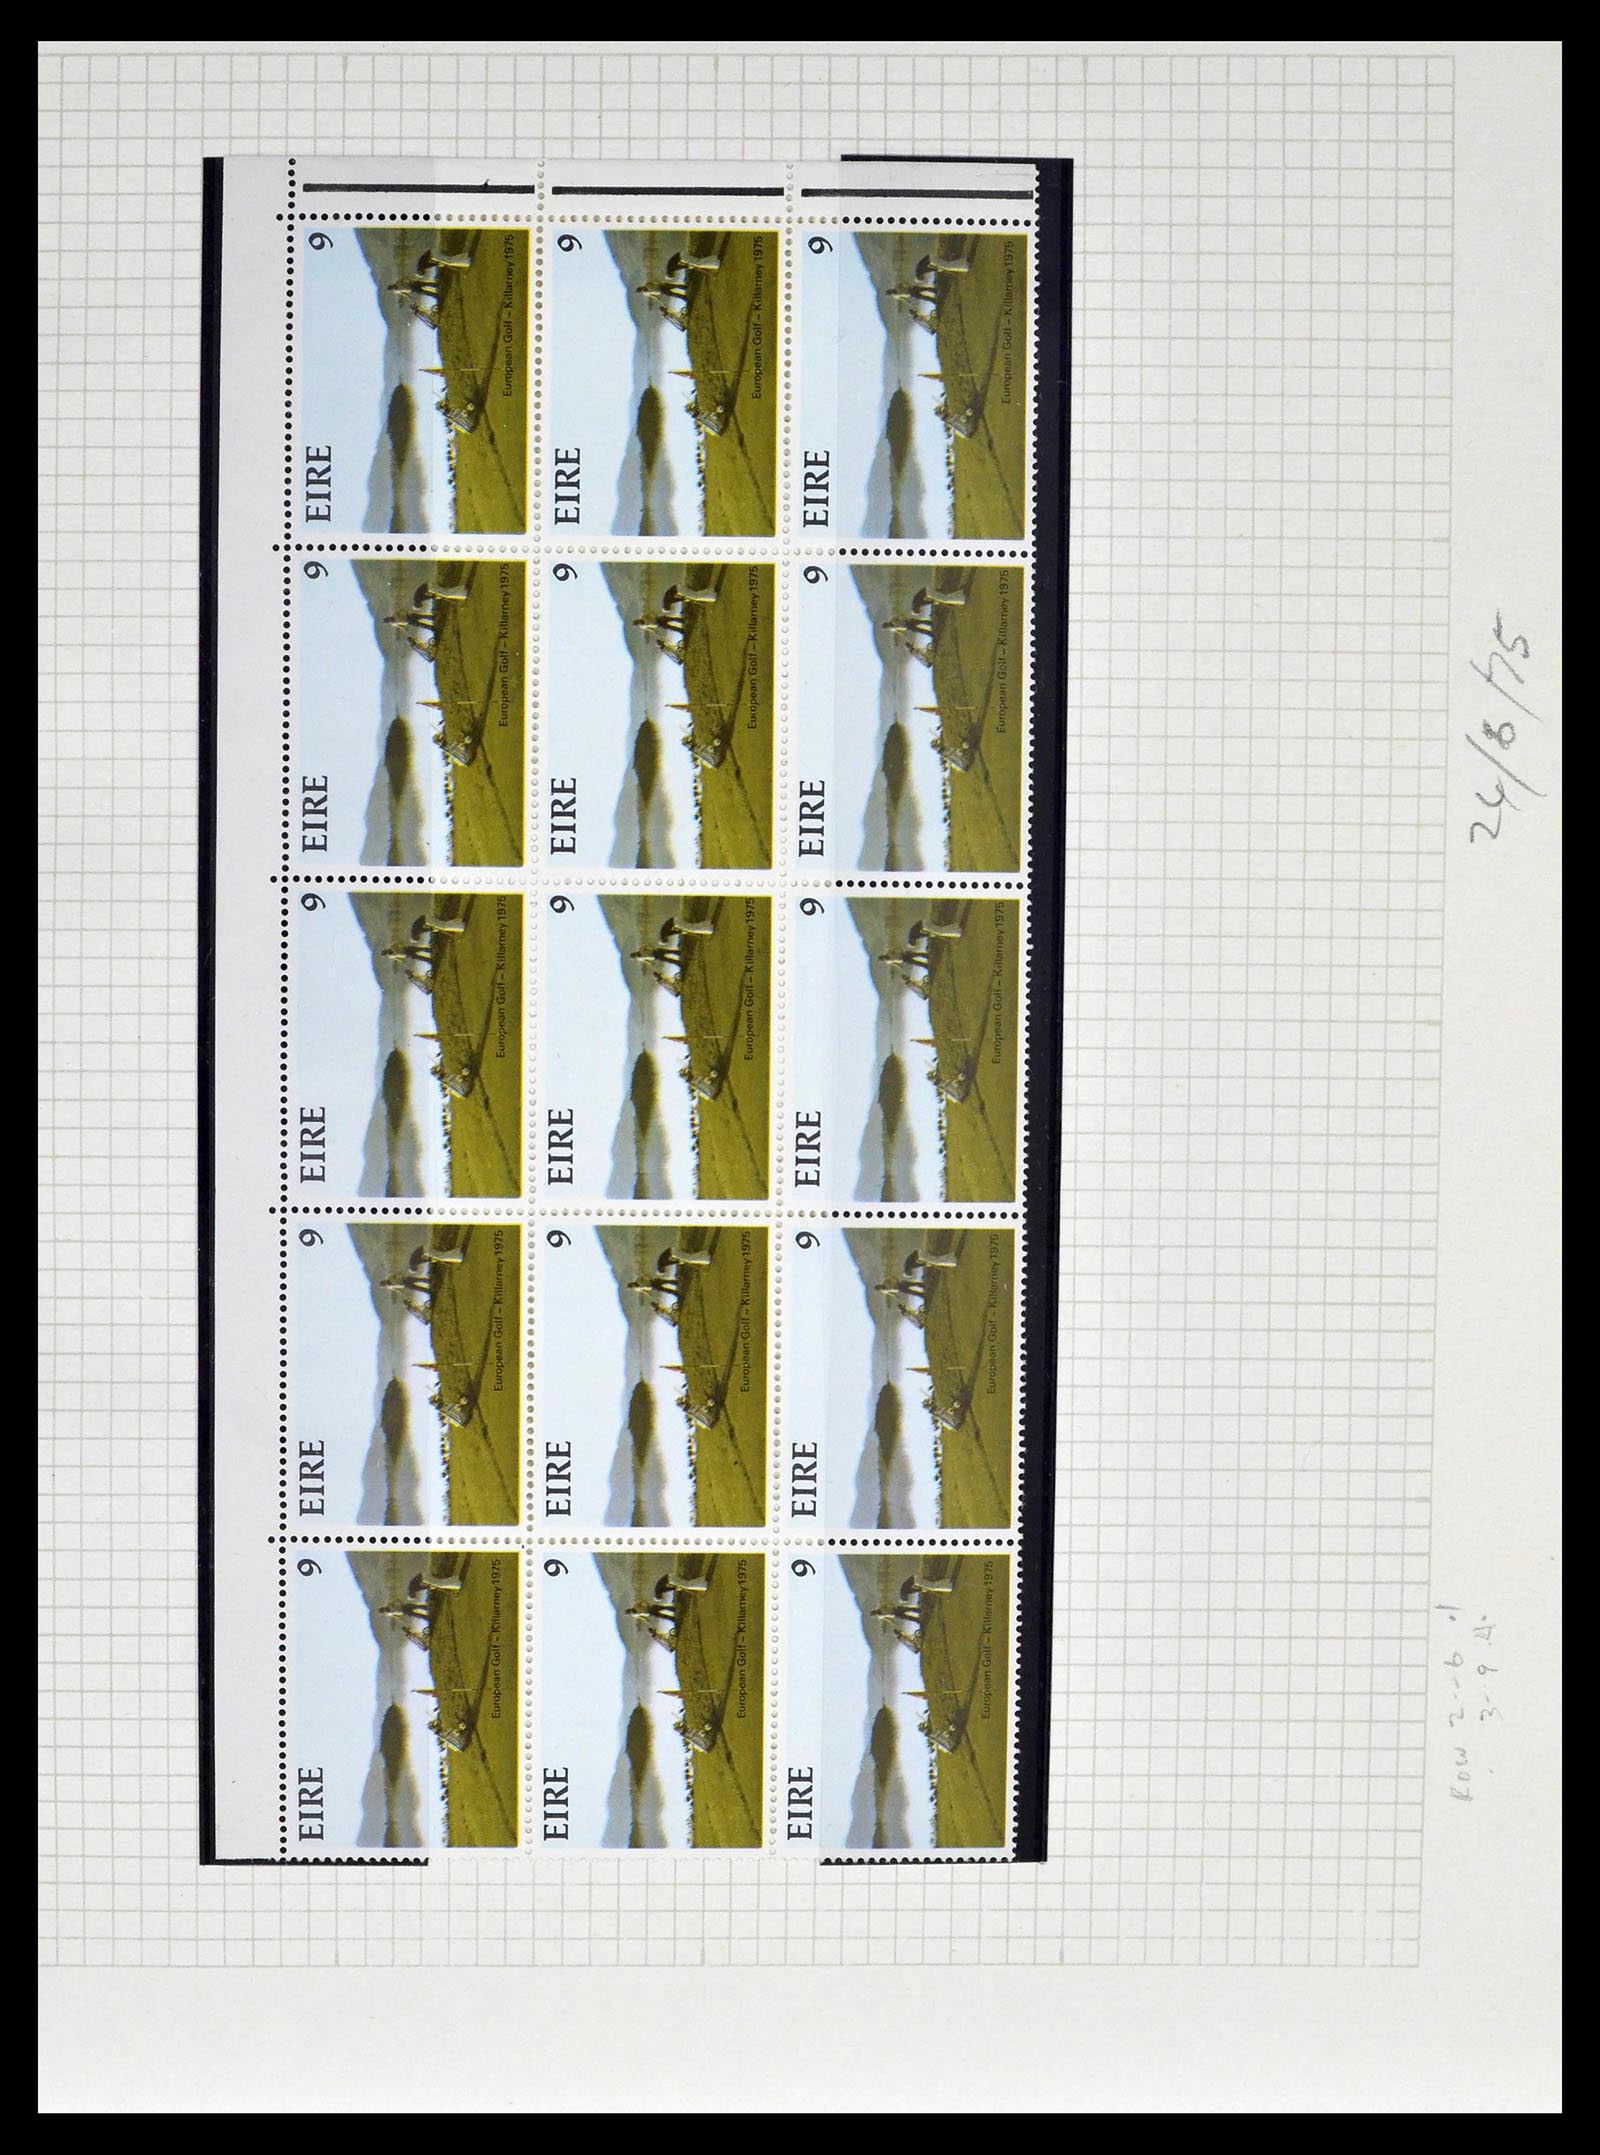 39272 0045 - Stamp collection 39272 Ireland plateflaws and varities 1963-1981.